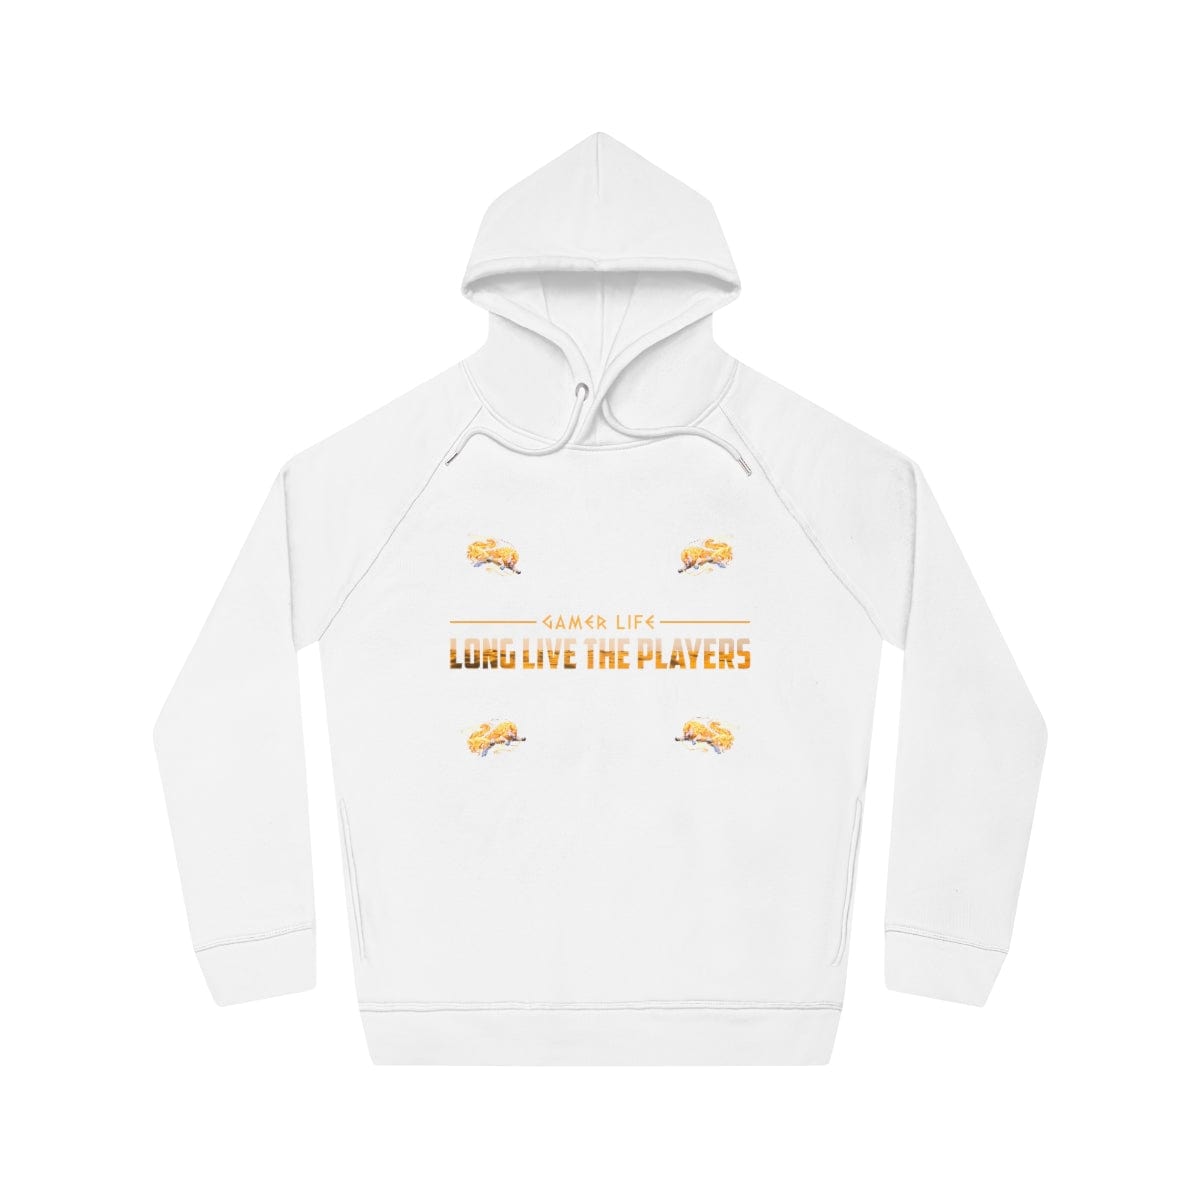 Gamer Fresh | The Celestial Call | Long Live the Players | Exclusive Unisex Sider Hoodie